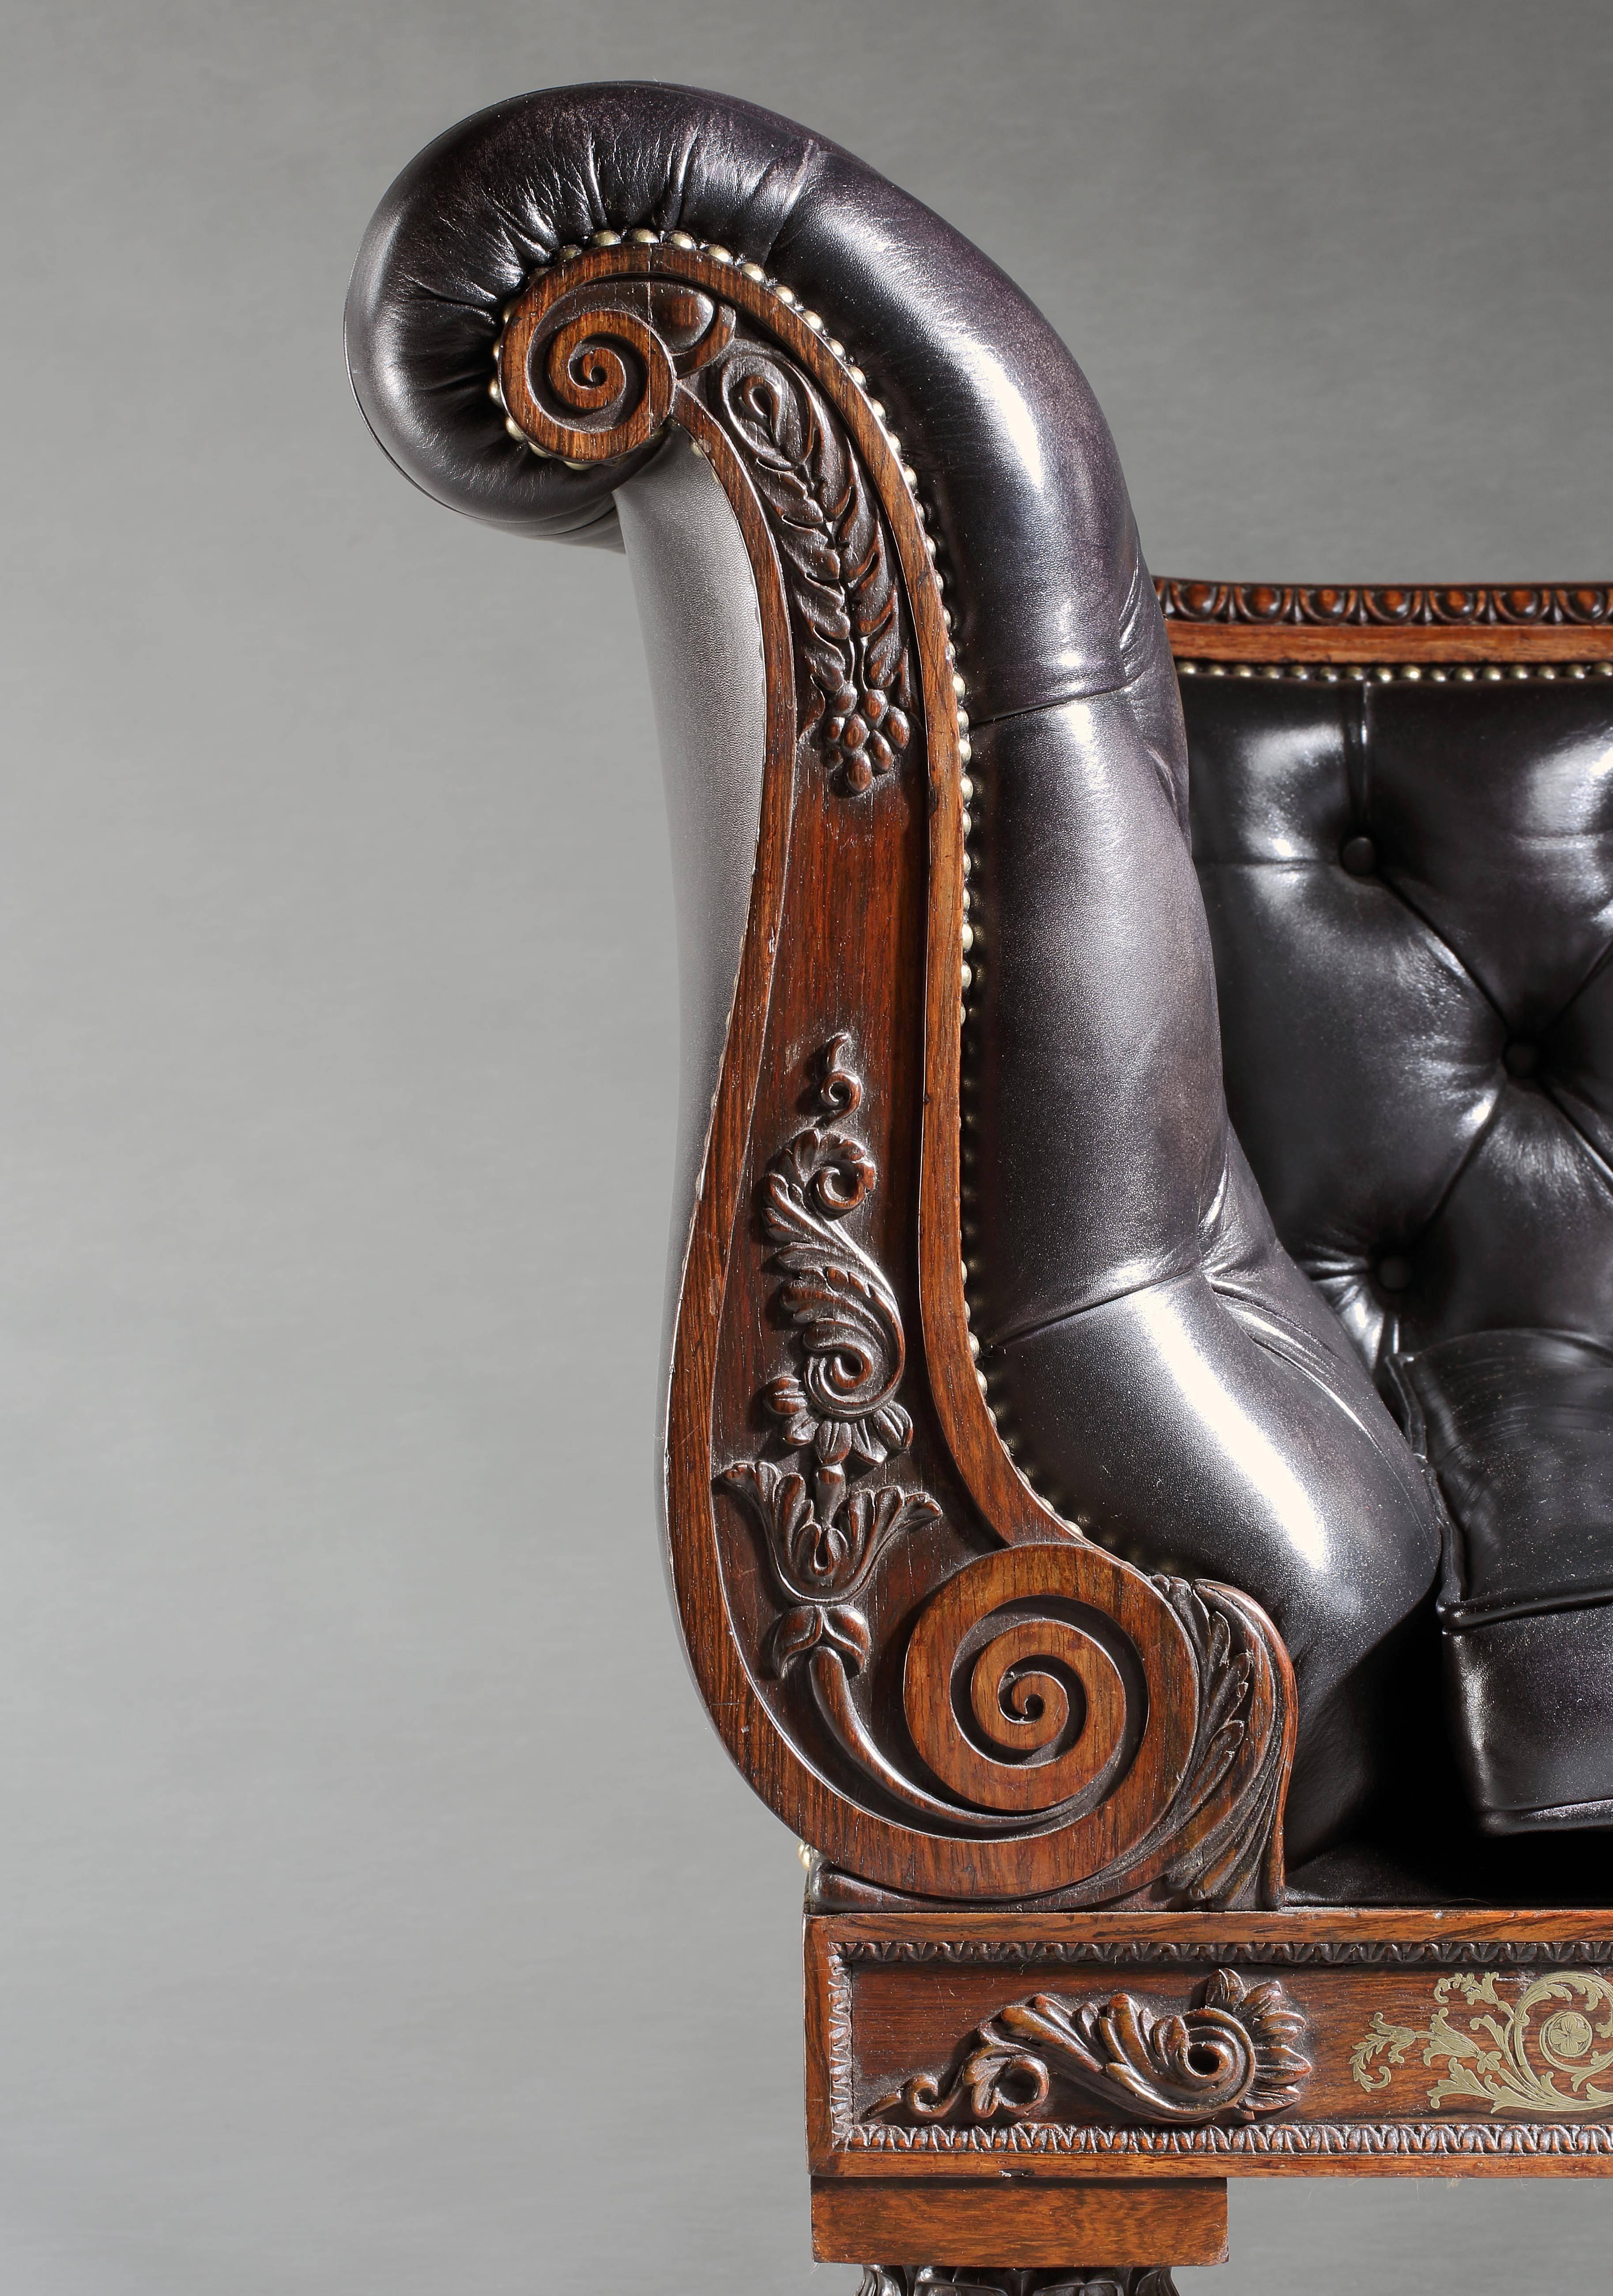 Constructed in Goncalo alves, rising from castor shod tapering lobed legs, the long front rail intricately decorated with cut brass inlaid arabesques, the swept and foliate carved ends of differing heights, conjoined by a running ovolo carved